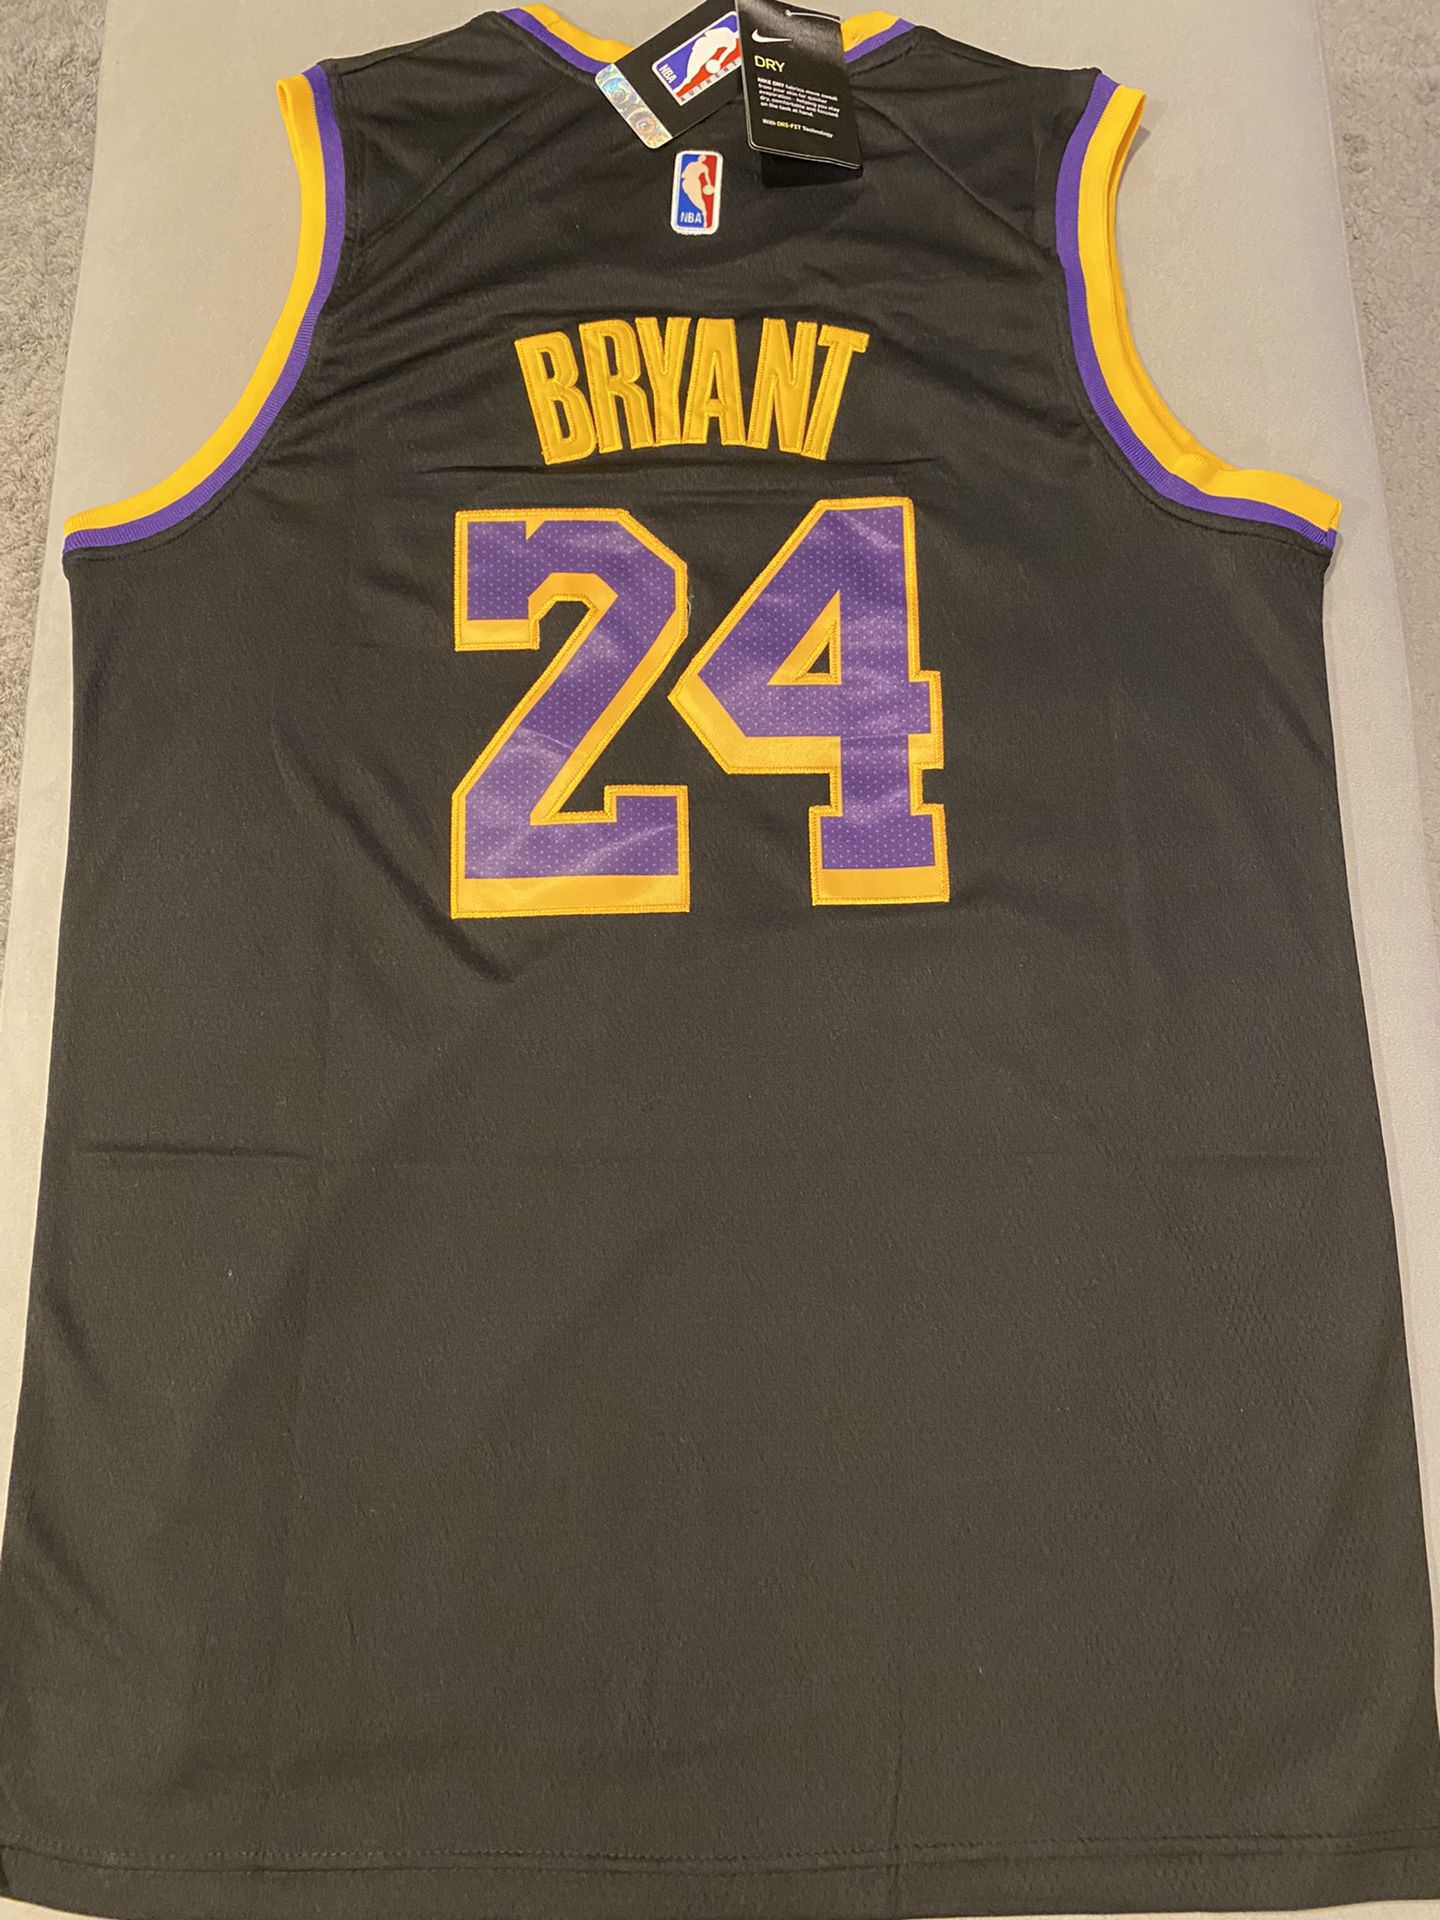 2010 NBA Finals Champions Los Angeles Lakers Kobe Bryant Basketball Jersey  for Sale in Rialto, CA - OfferUp